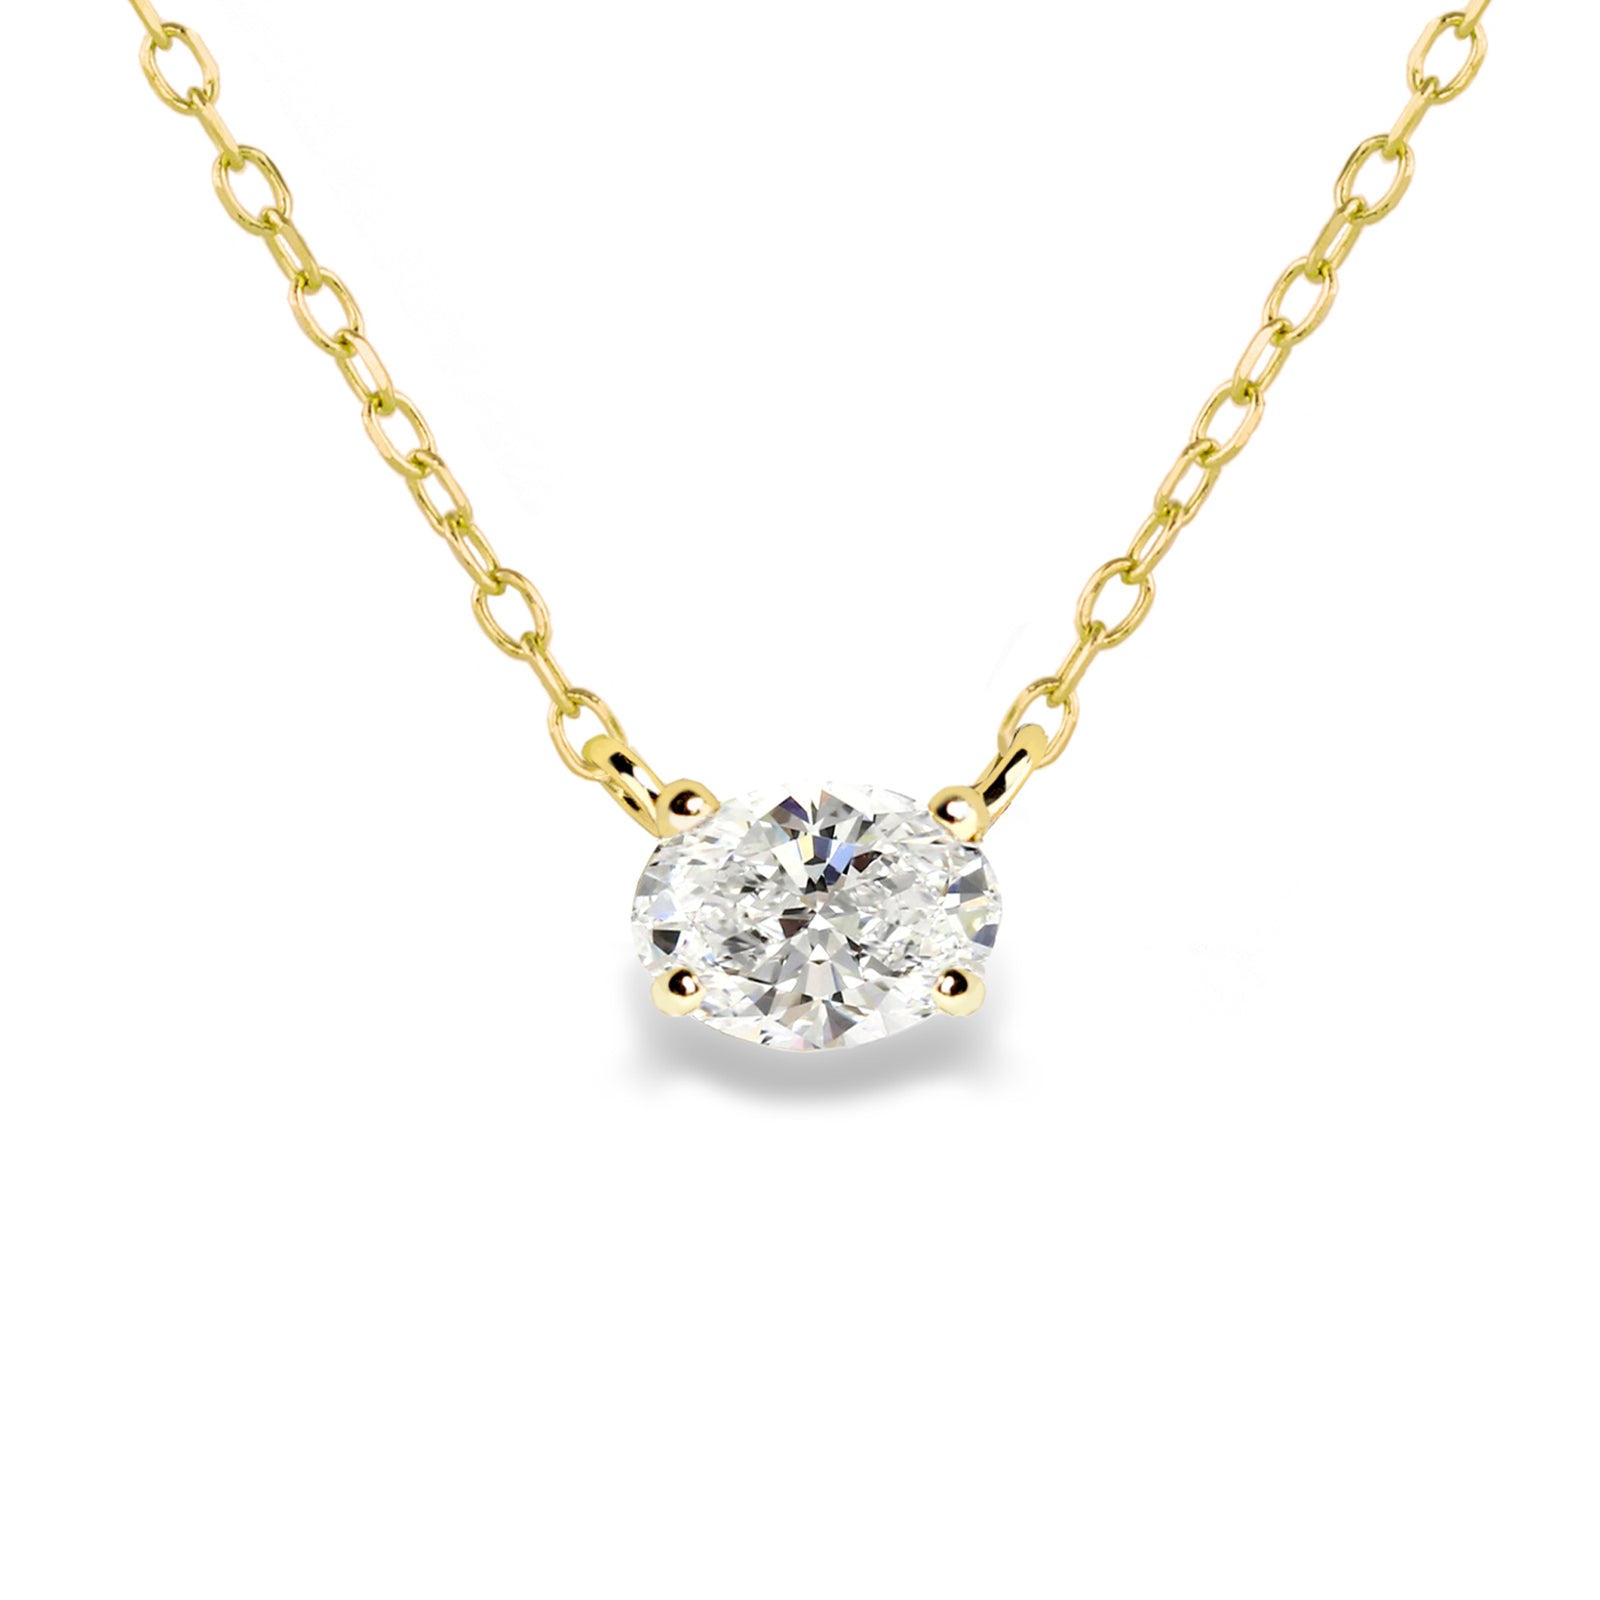 Jamie Park Oval Diamond Solitaire Necklace This Oval Diamond Solitaire Necklace features a sparkling lab diamond, set in a classic four prong design. With each diamond certified by IGI, this necklace makes for a timeless and cherished gift, perfect for any special occasion. Add a touch of elegance to any outfit with this beautiful piece. Chain length 16-18"&nbsp;